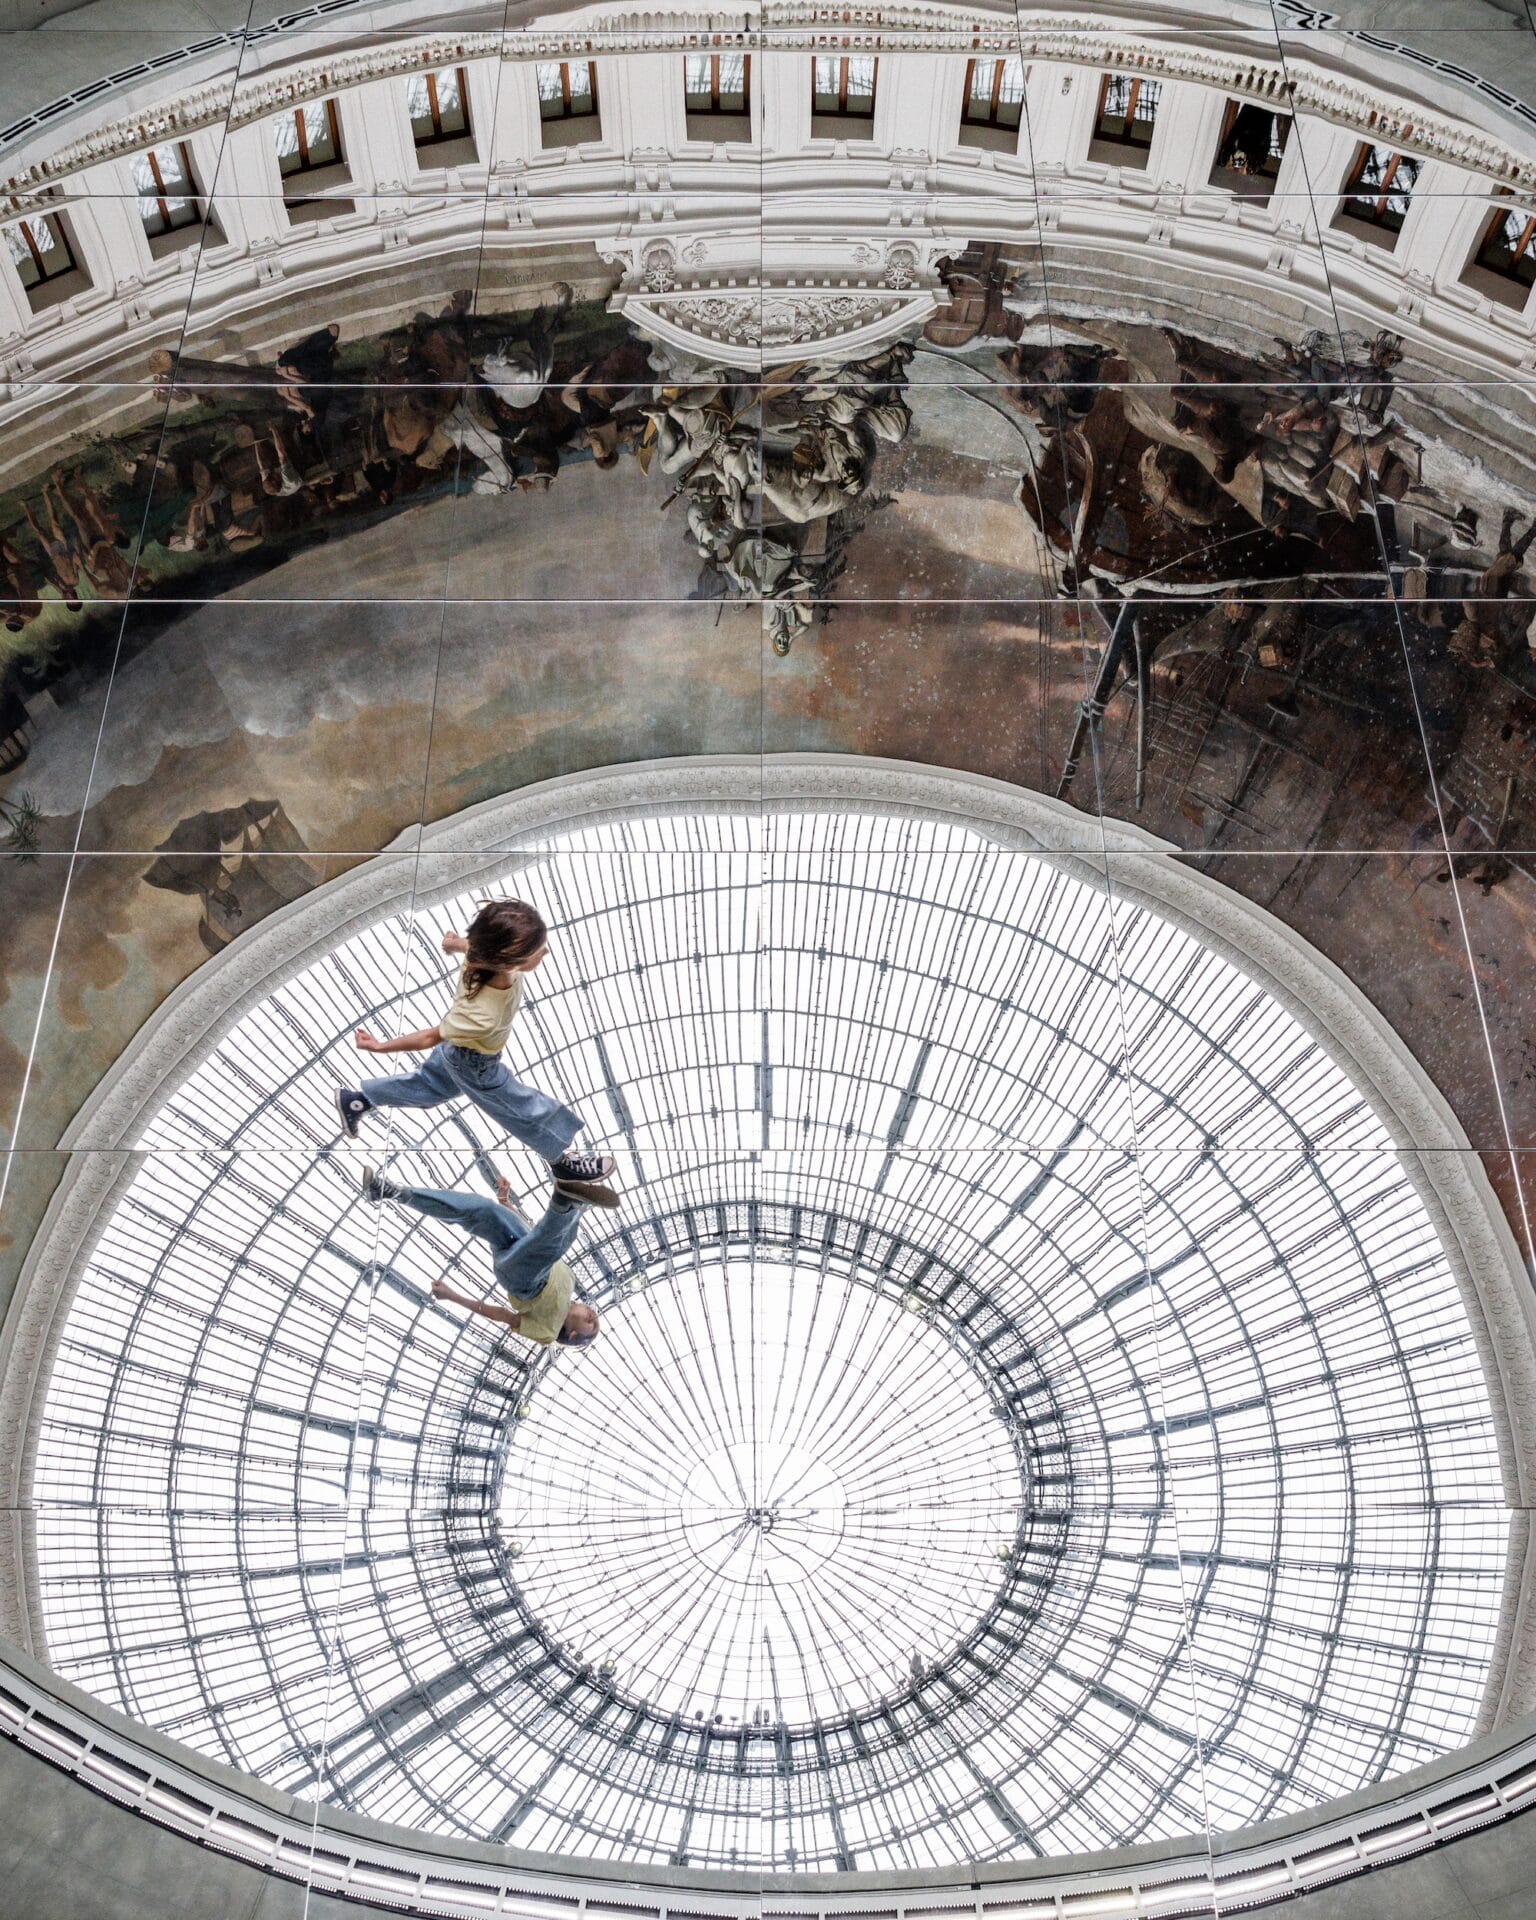 A Disorienting Mirrored Floor by Kimsooja Skews Perspectives at a Paris Art Museum